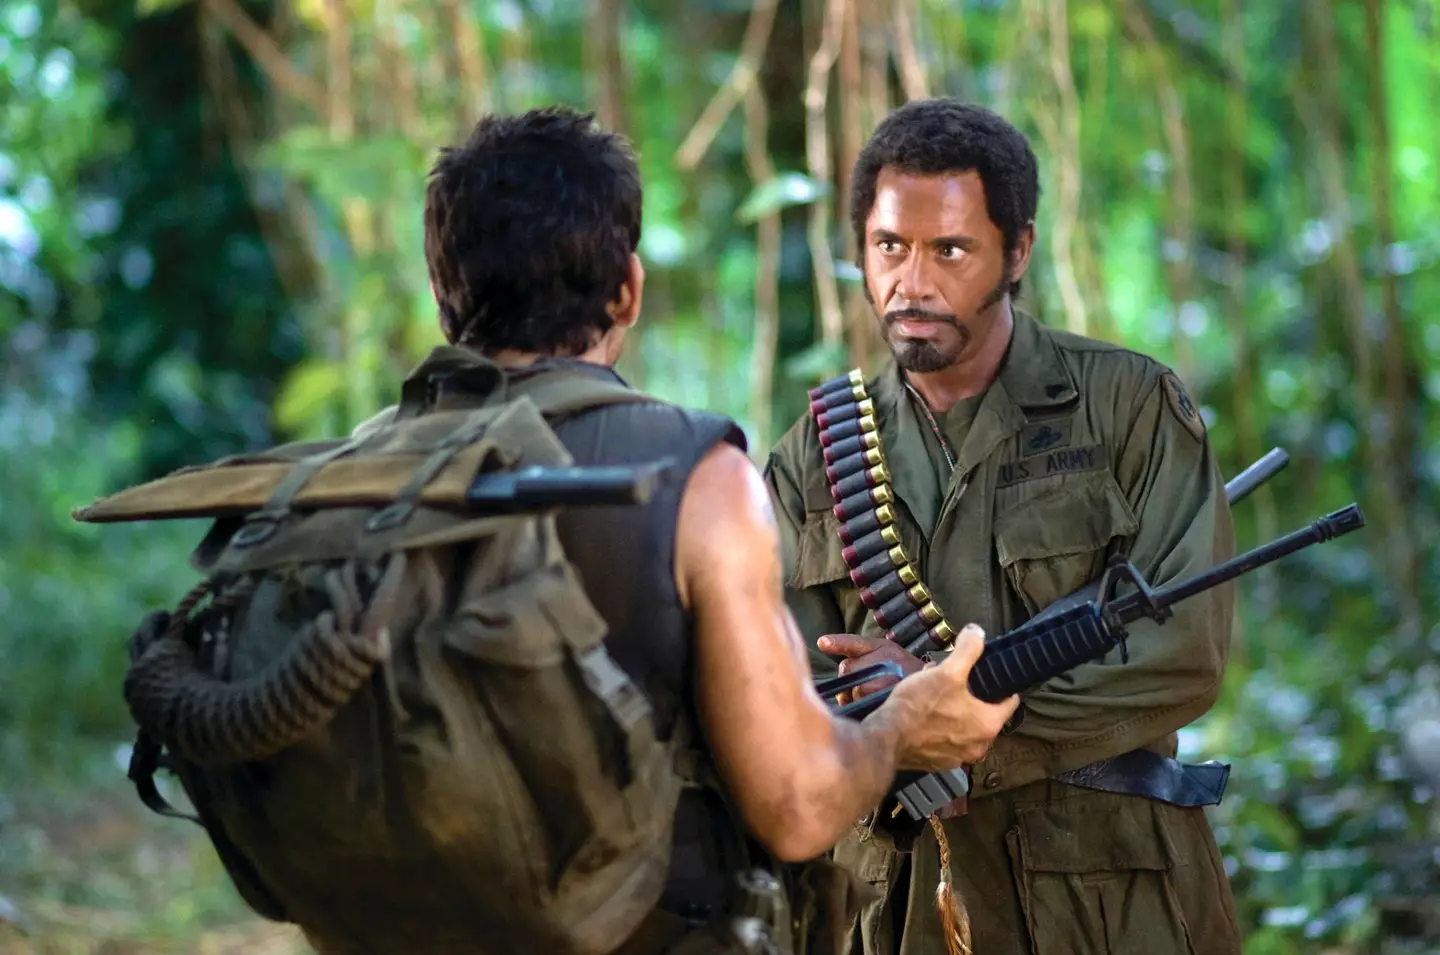 Robert Downey Jr attracted controversy for wearing blackface in Tropic Thunder.